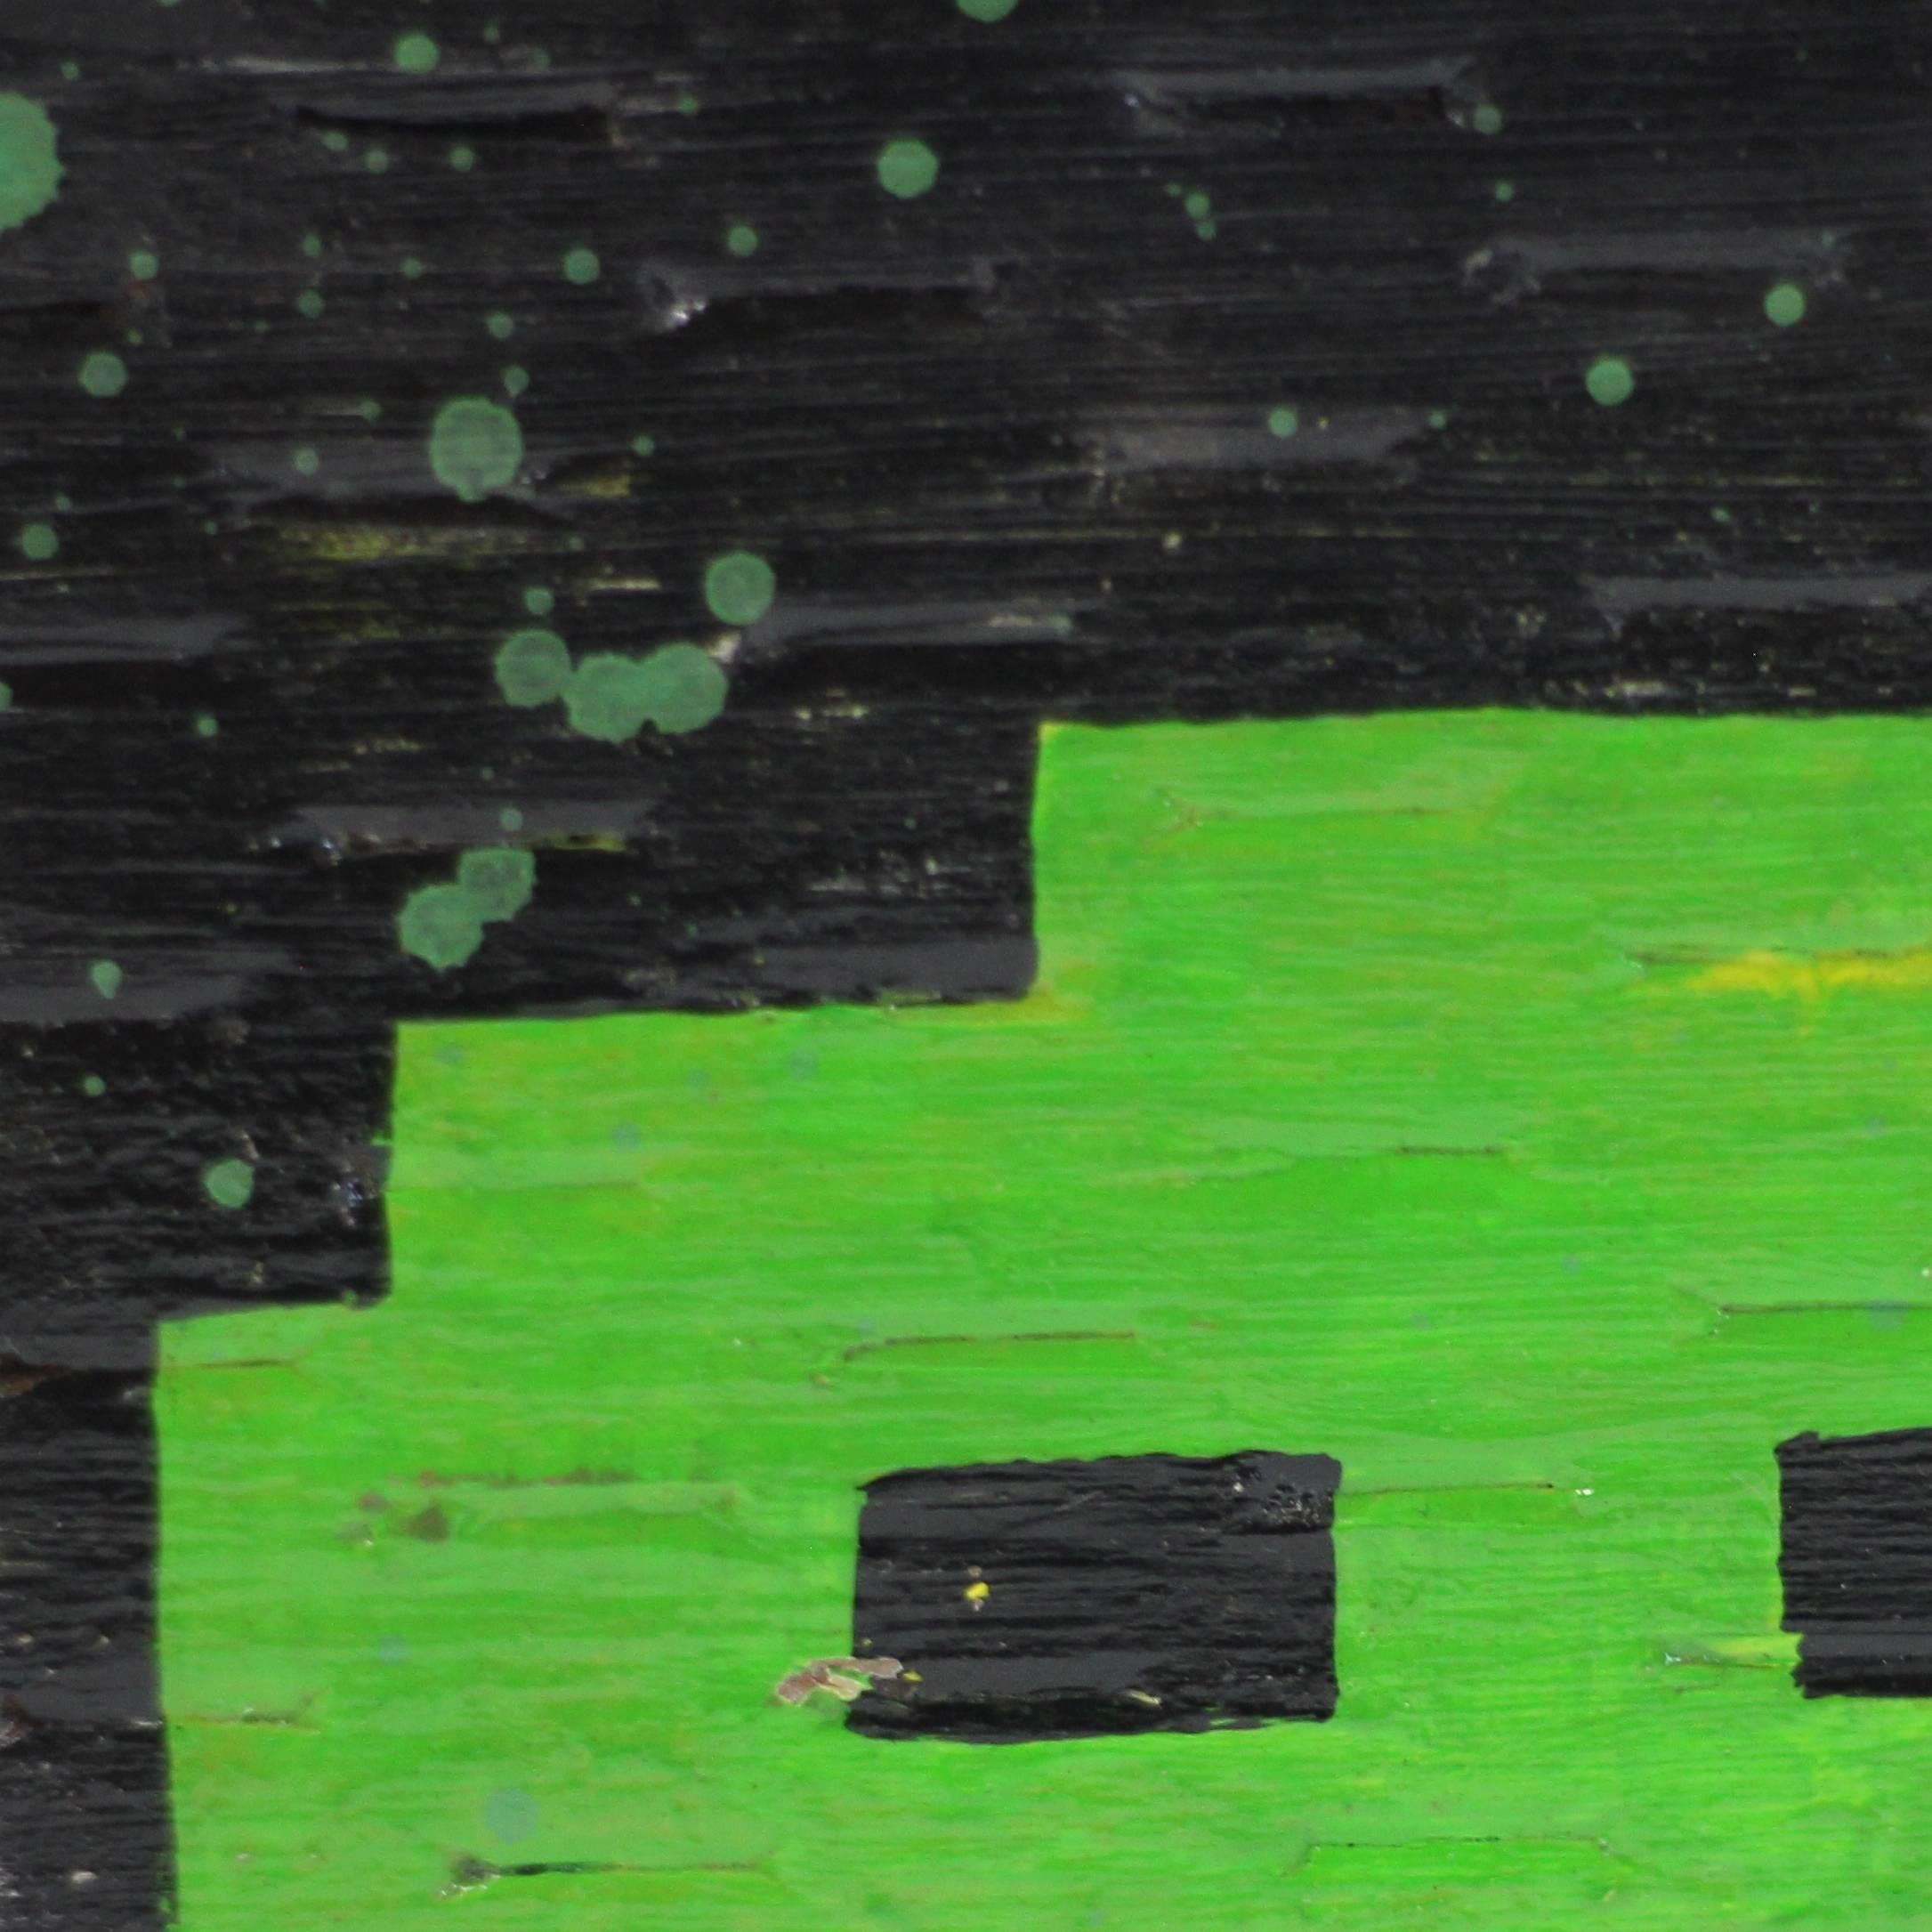 Space Invader Green - Pop Art Painting by Courtney Raney